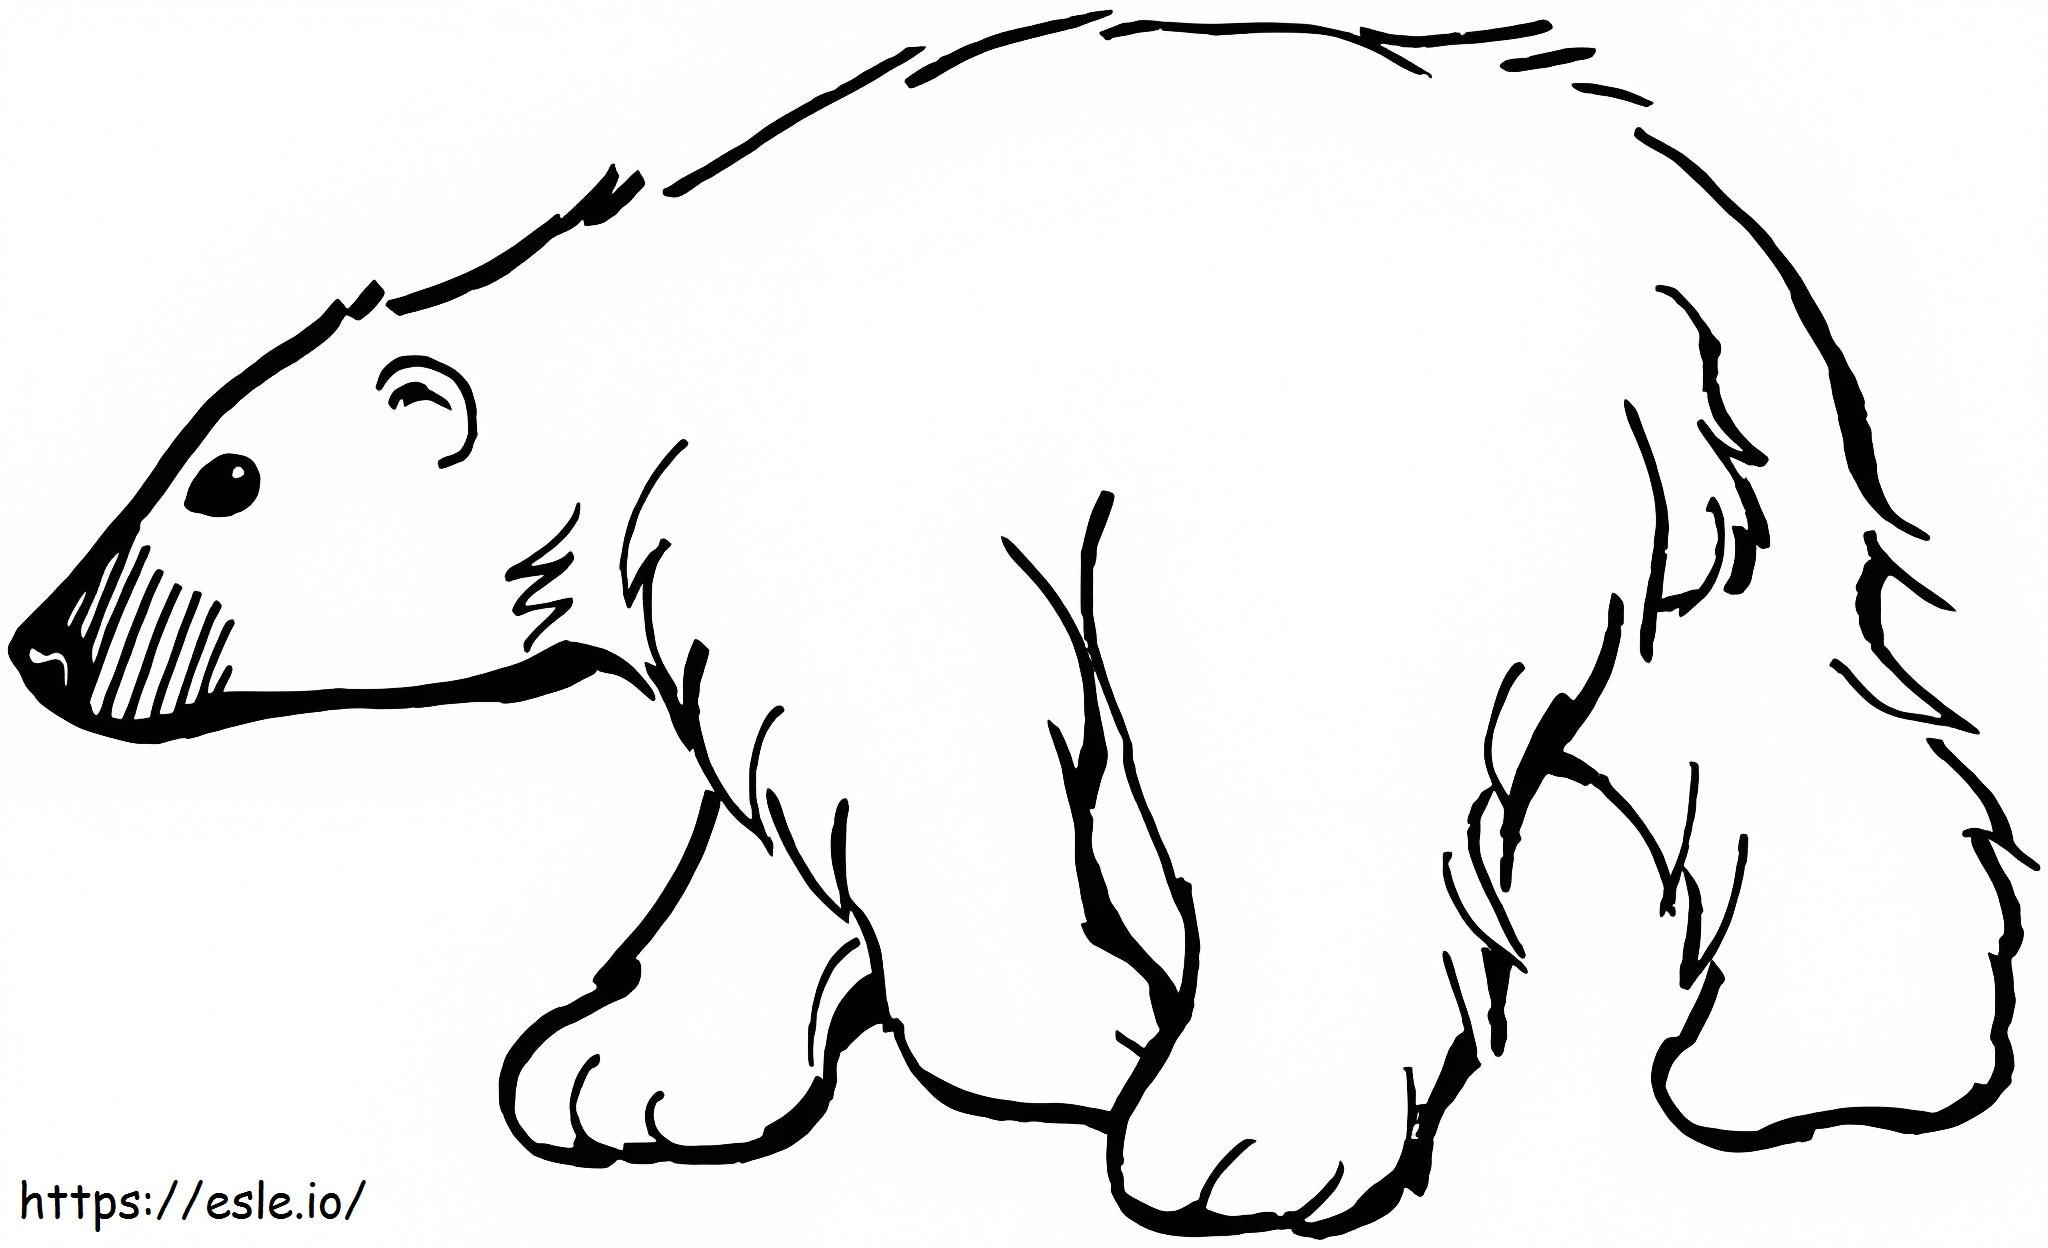 Normal Ice Bear coloring page